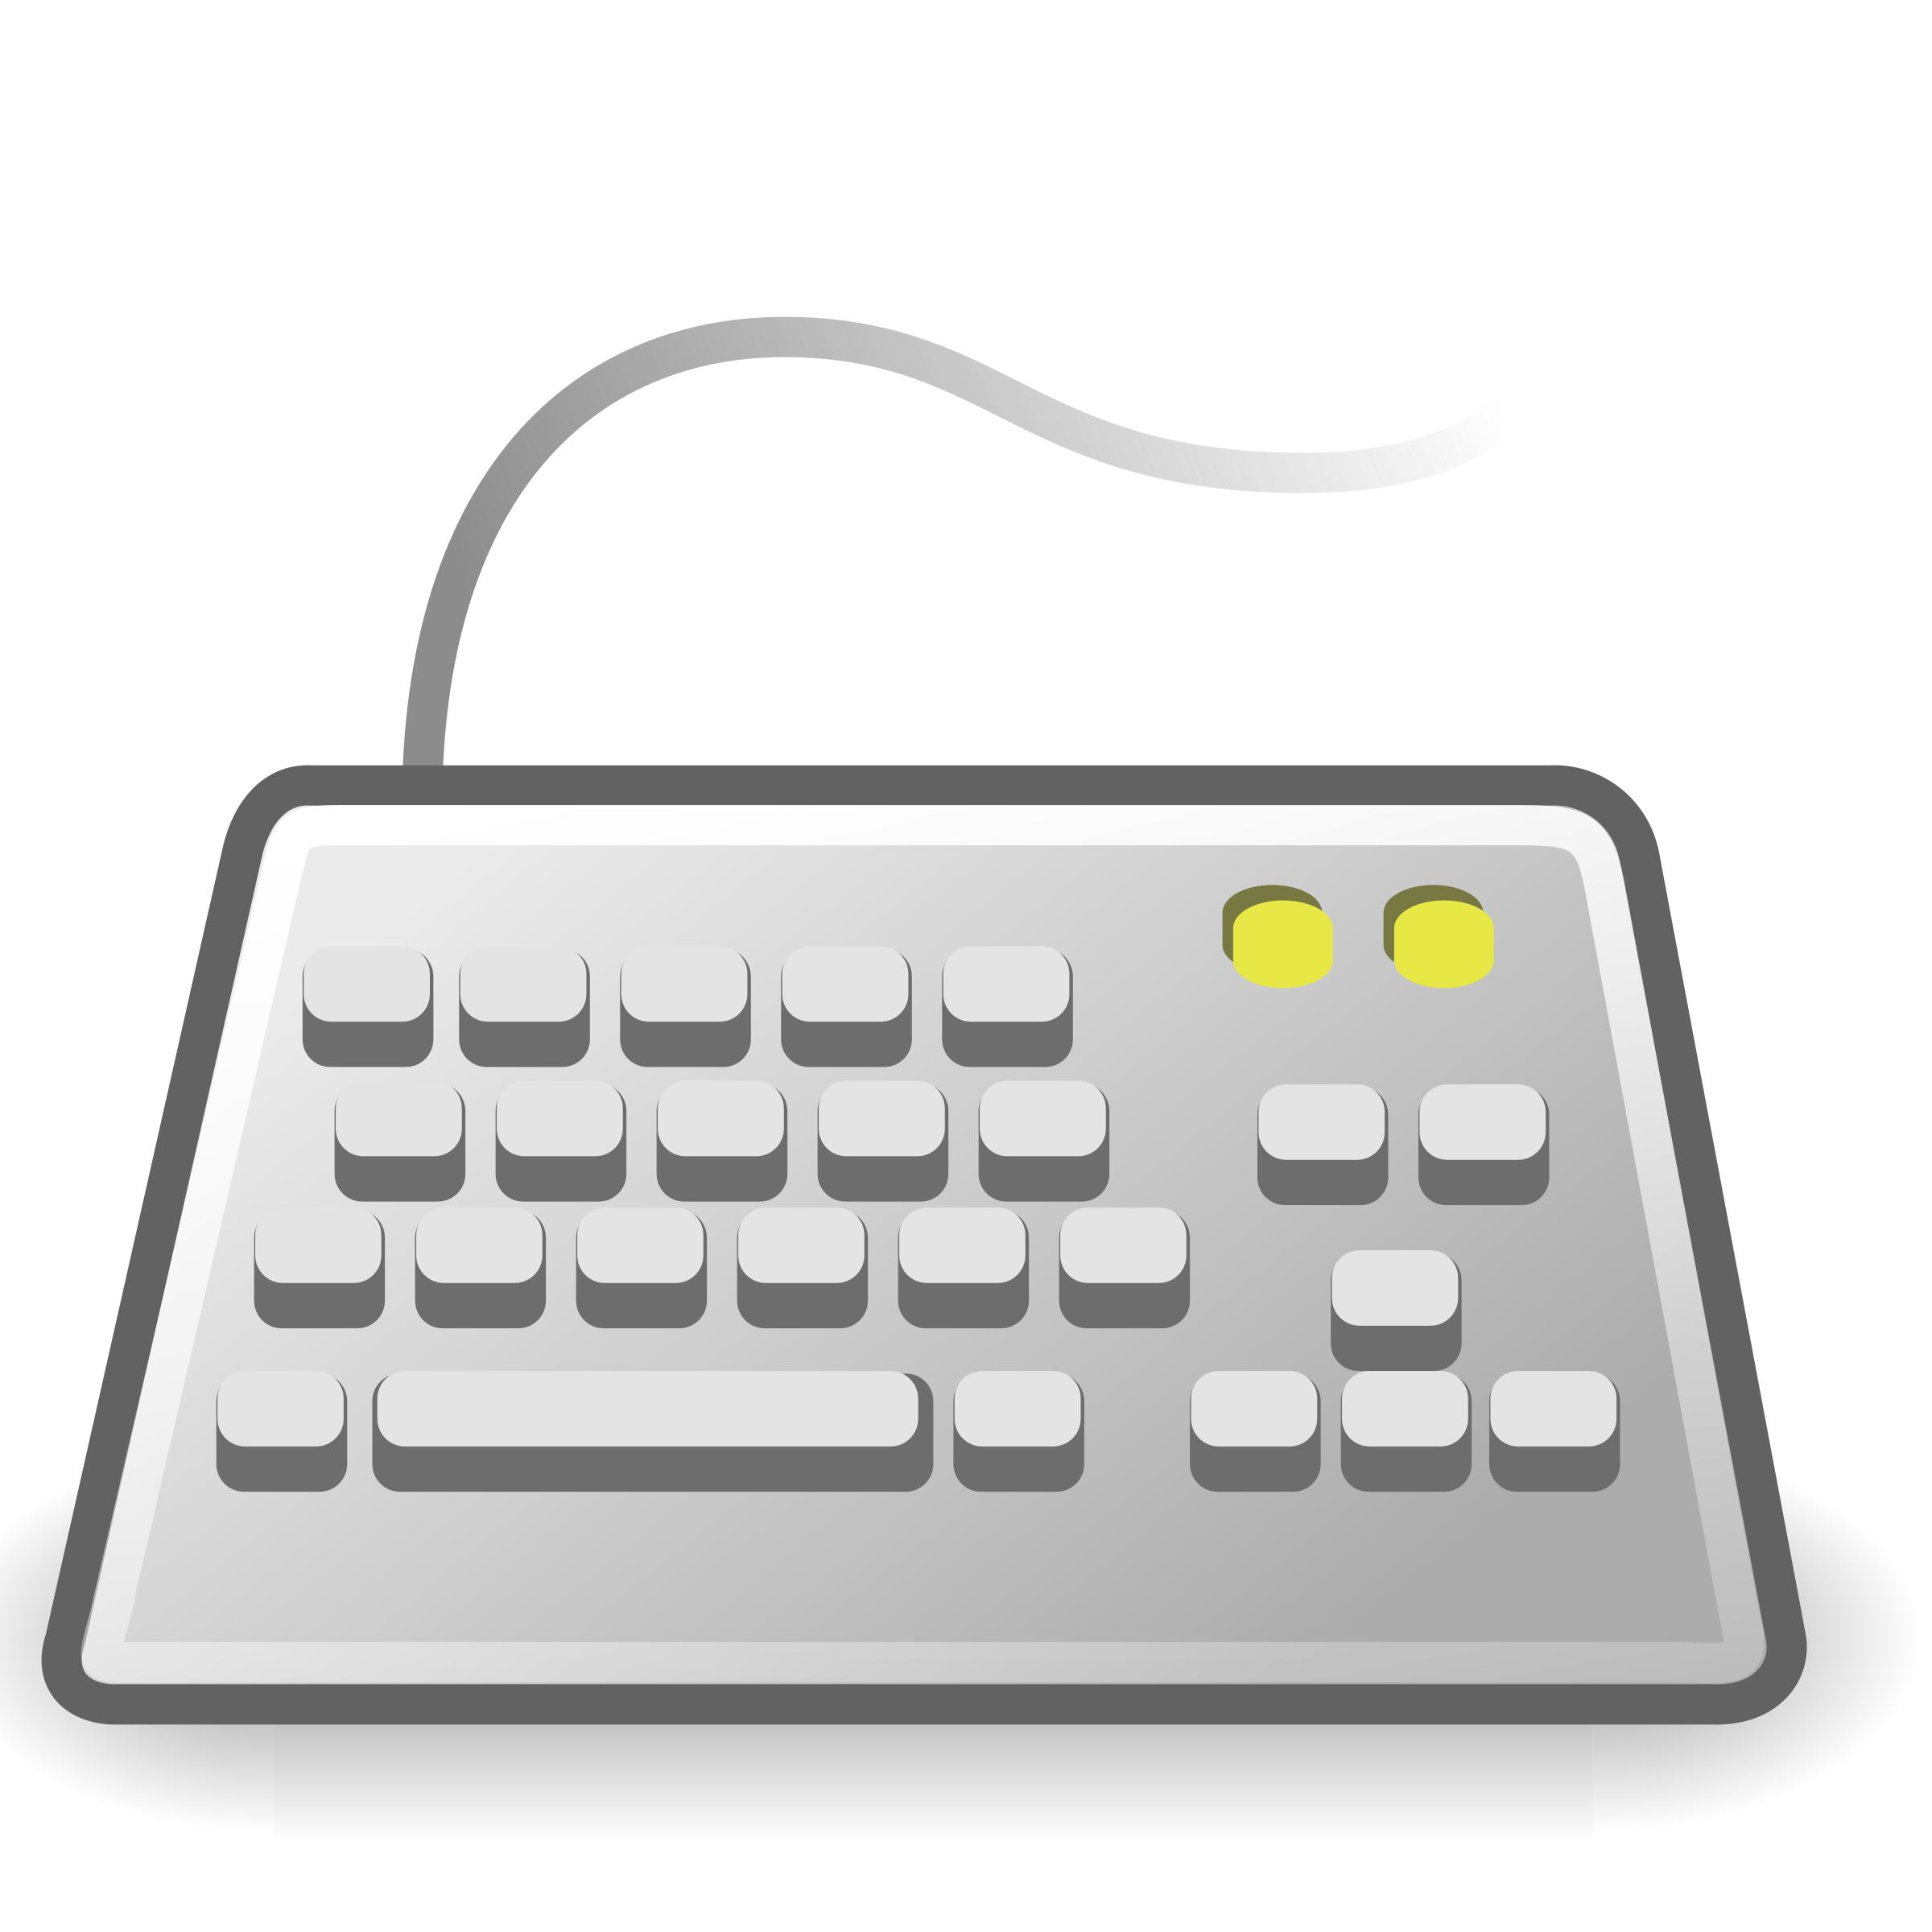 Keyboard clipart compuer. Tango input icons png